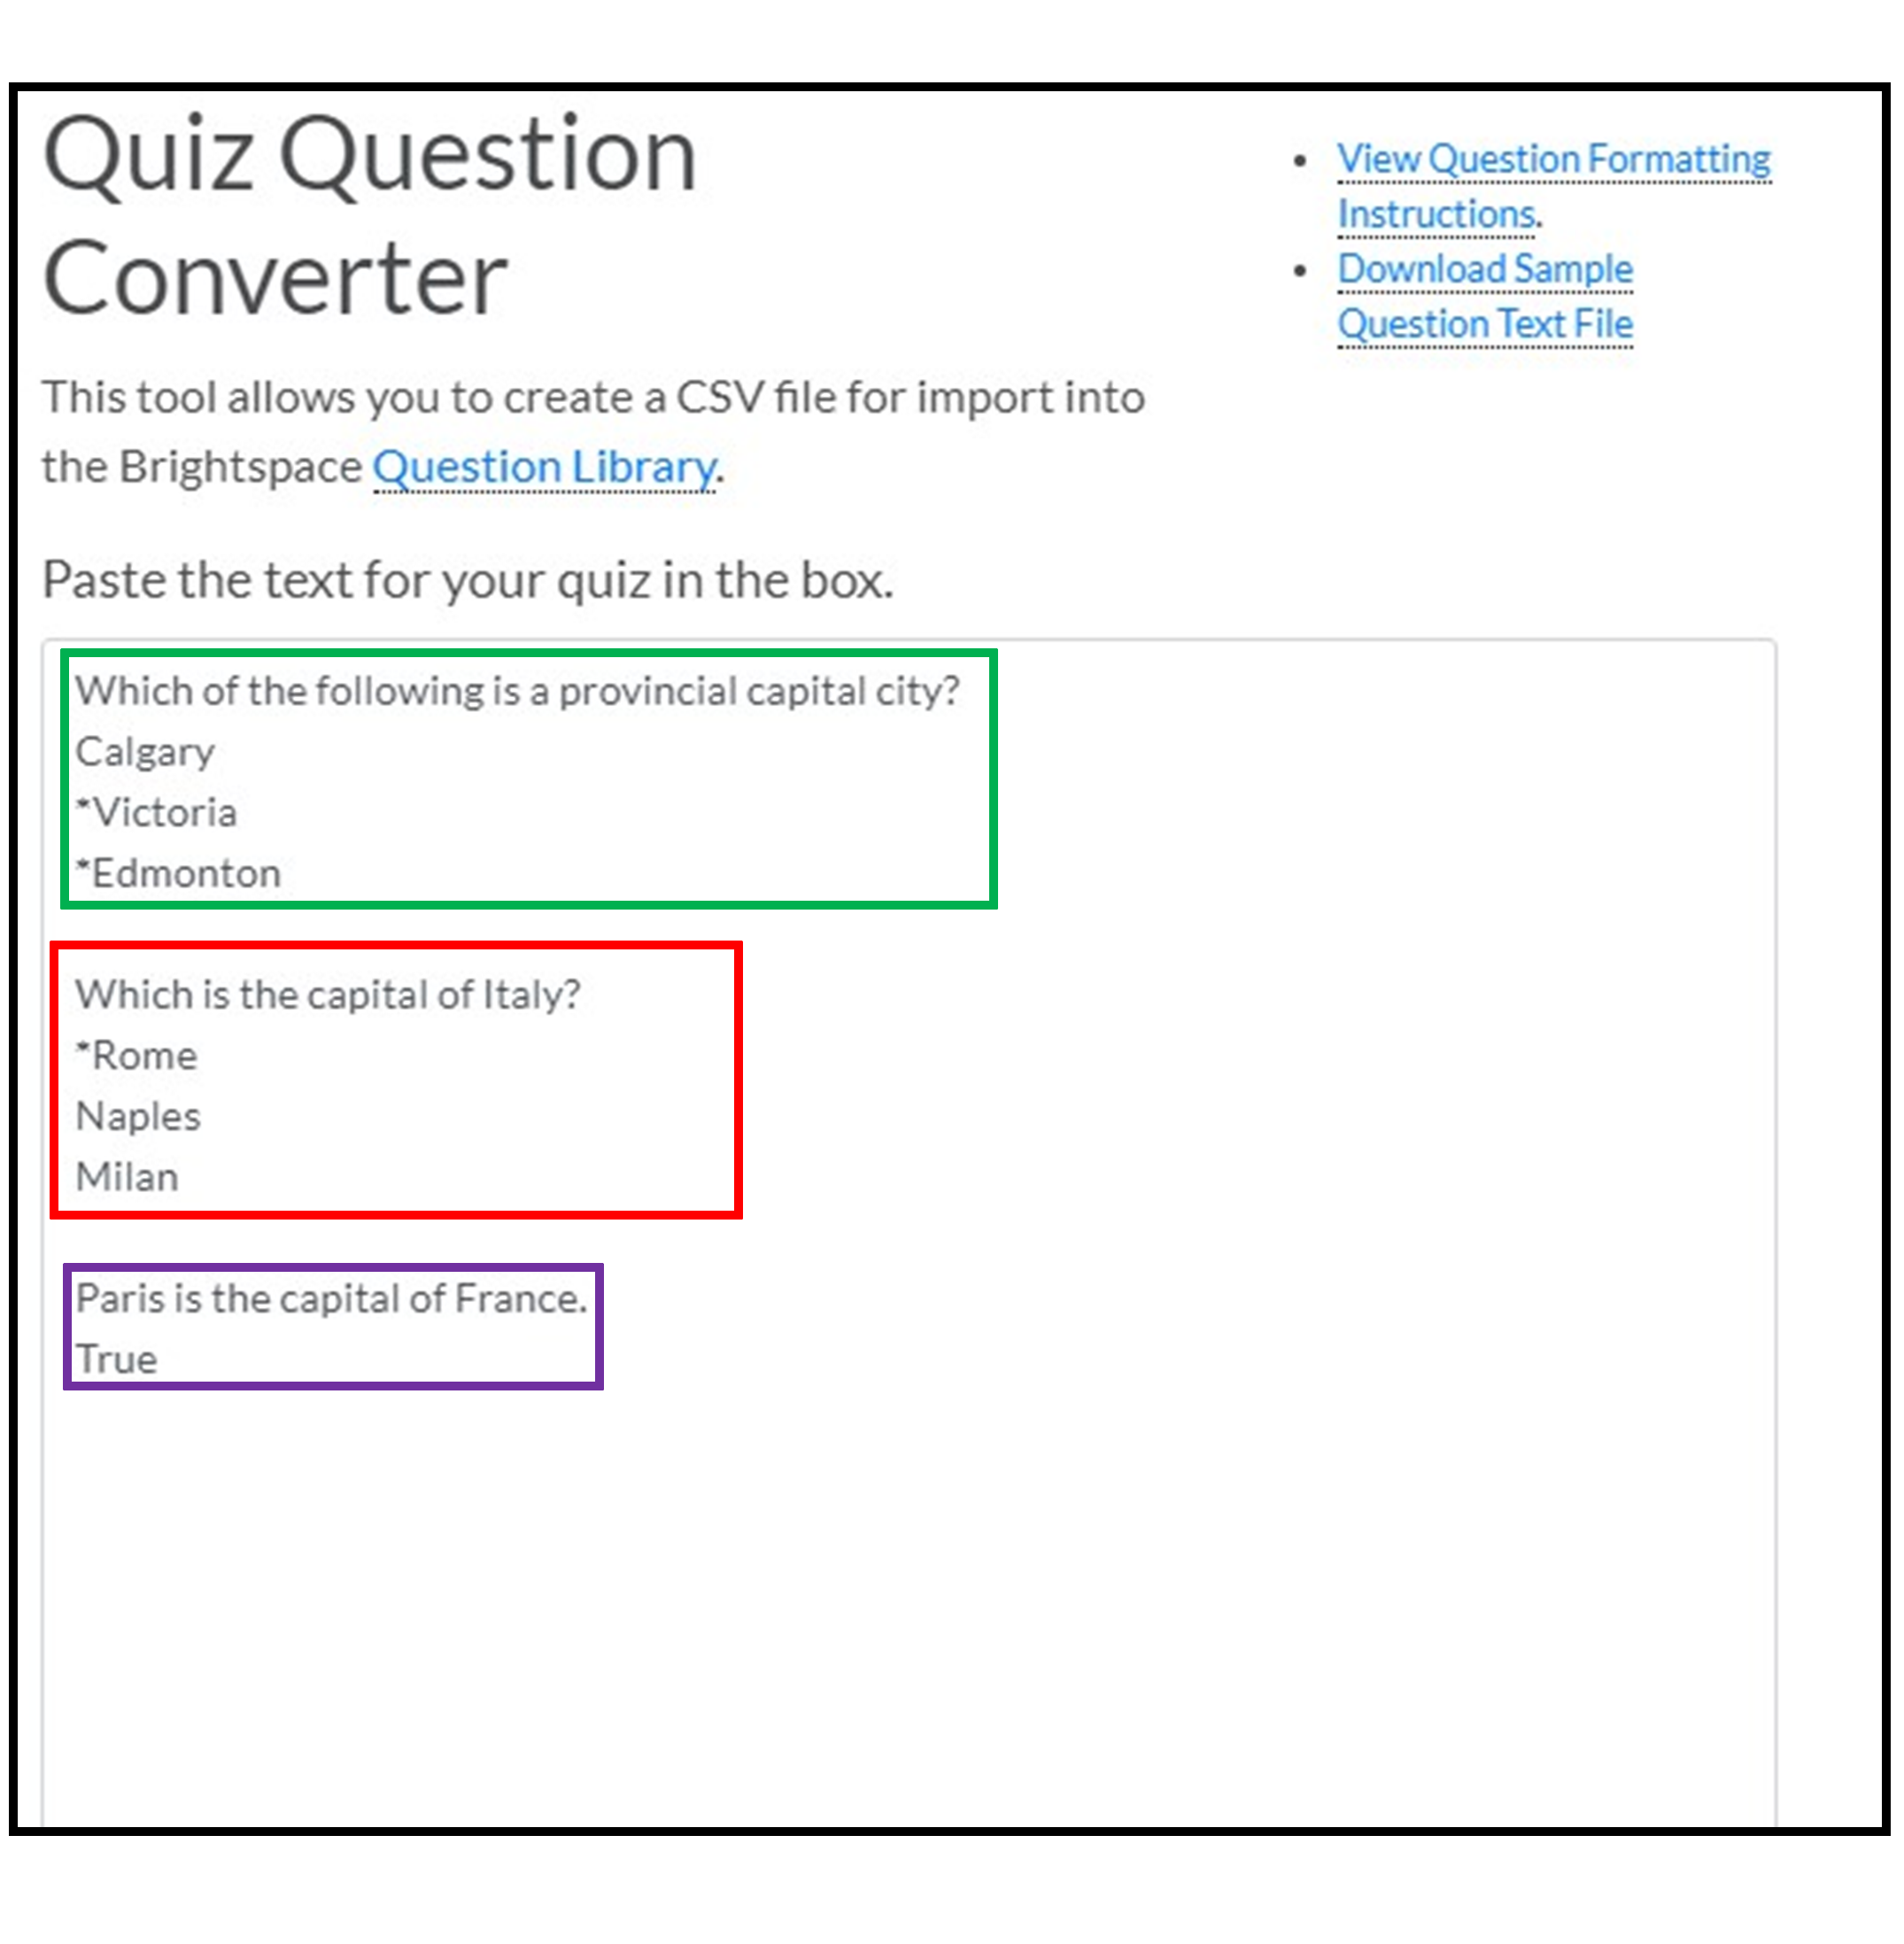  Different question types are indicated by the way text is formatted in the converter tool. Each question is on its own line, with one space separating each question; each potential answer is listed on a separate line below the question, with correct answers marked with an asterisk right before (e.g., the multi-select question, "Which of the following is a provincial capital city?" has Calgary, *Victoria, and *Edmonton). True/false questions list the answer below the statement (e.g., "Paris is the capital of France" has "True" on the line directly beneath).